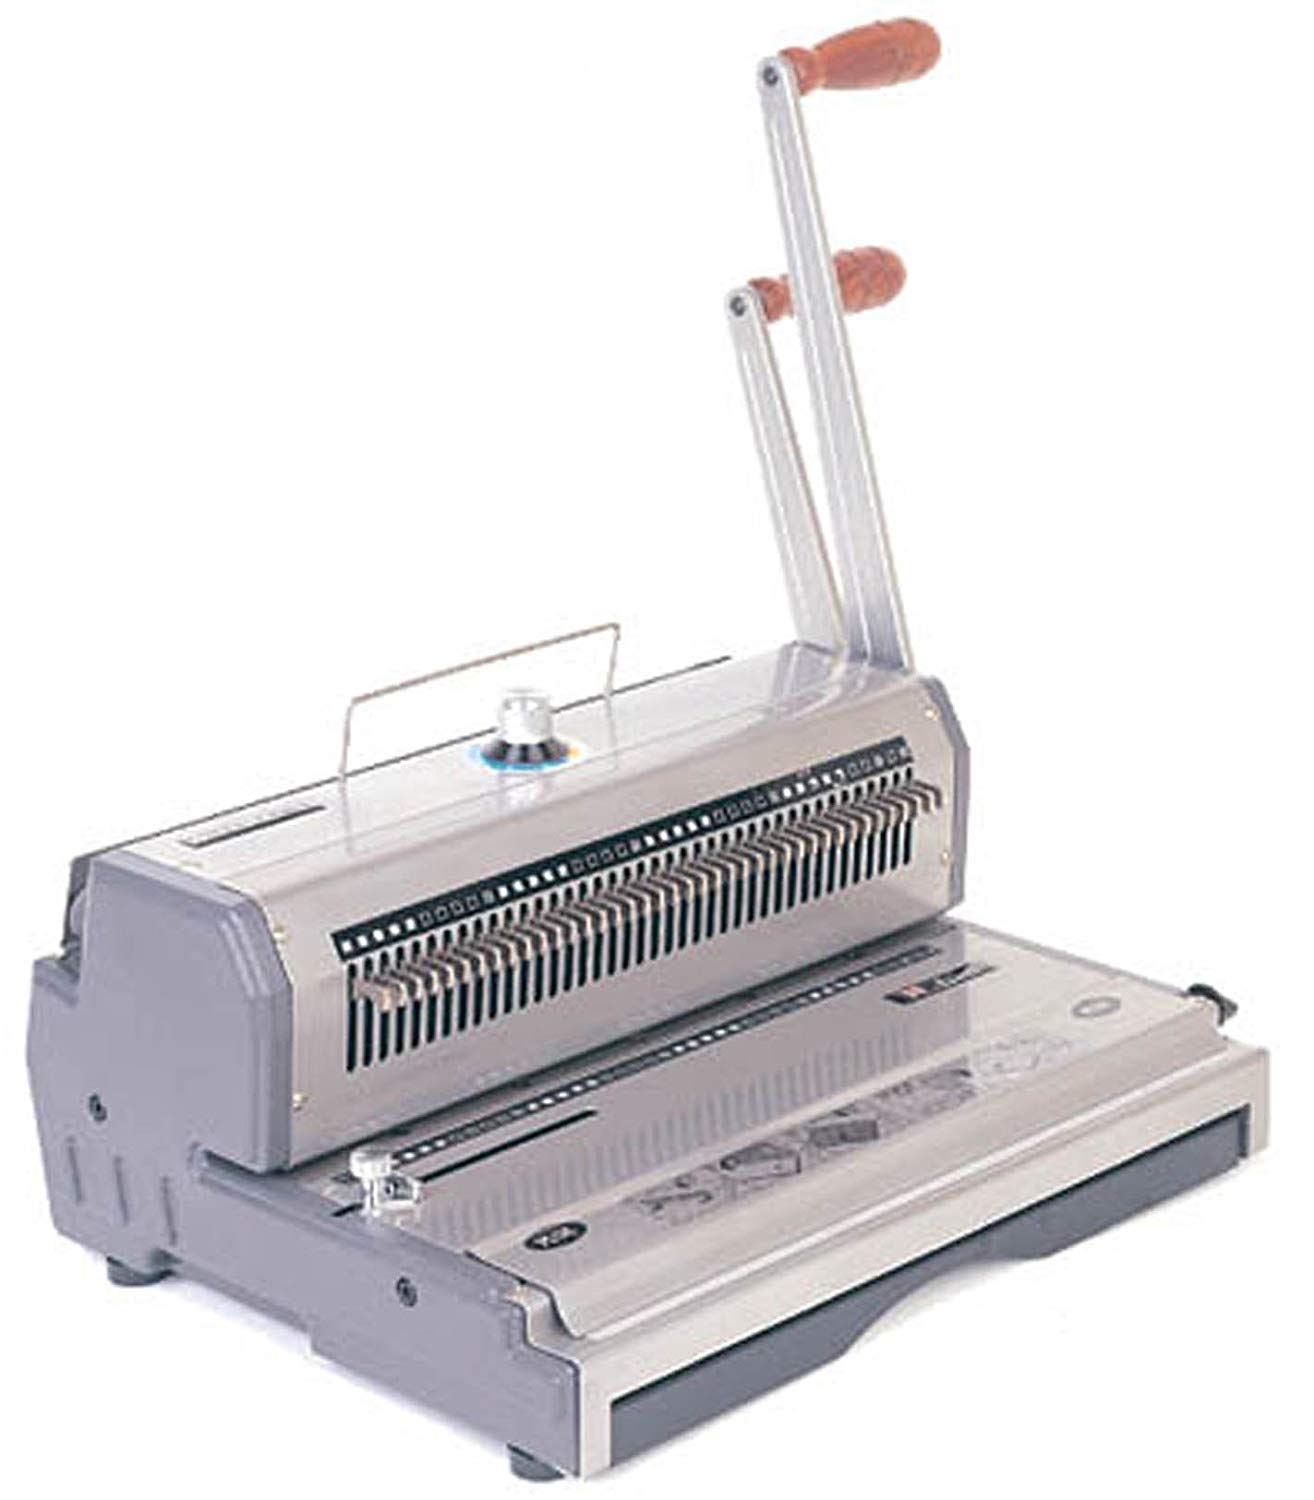 High Quality Roll Laminator Machine for All Kind of Laminating Jobs